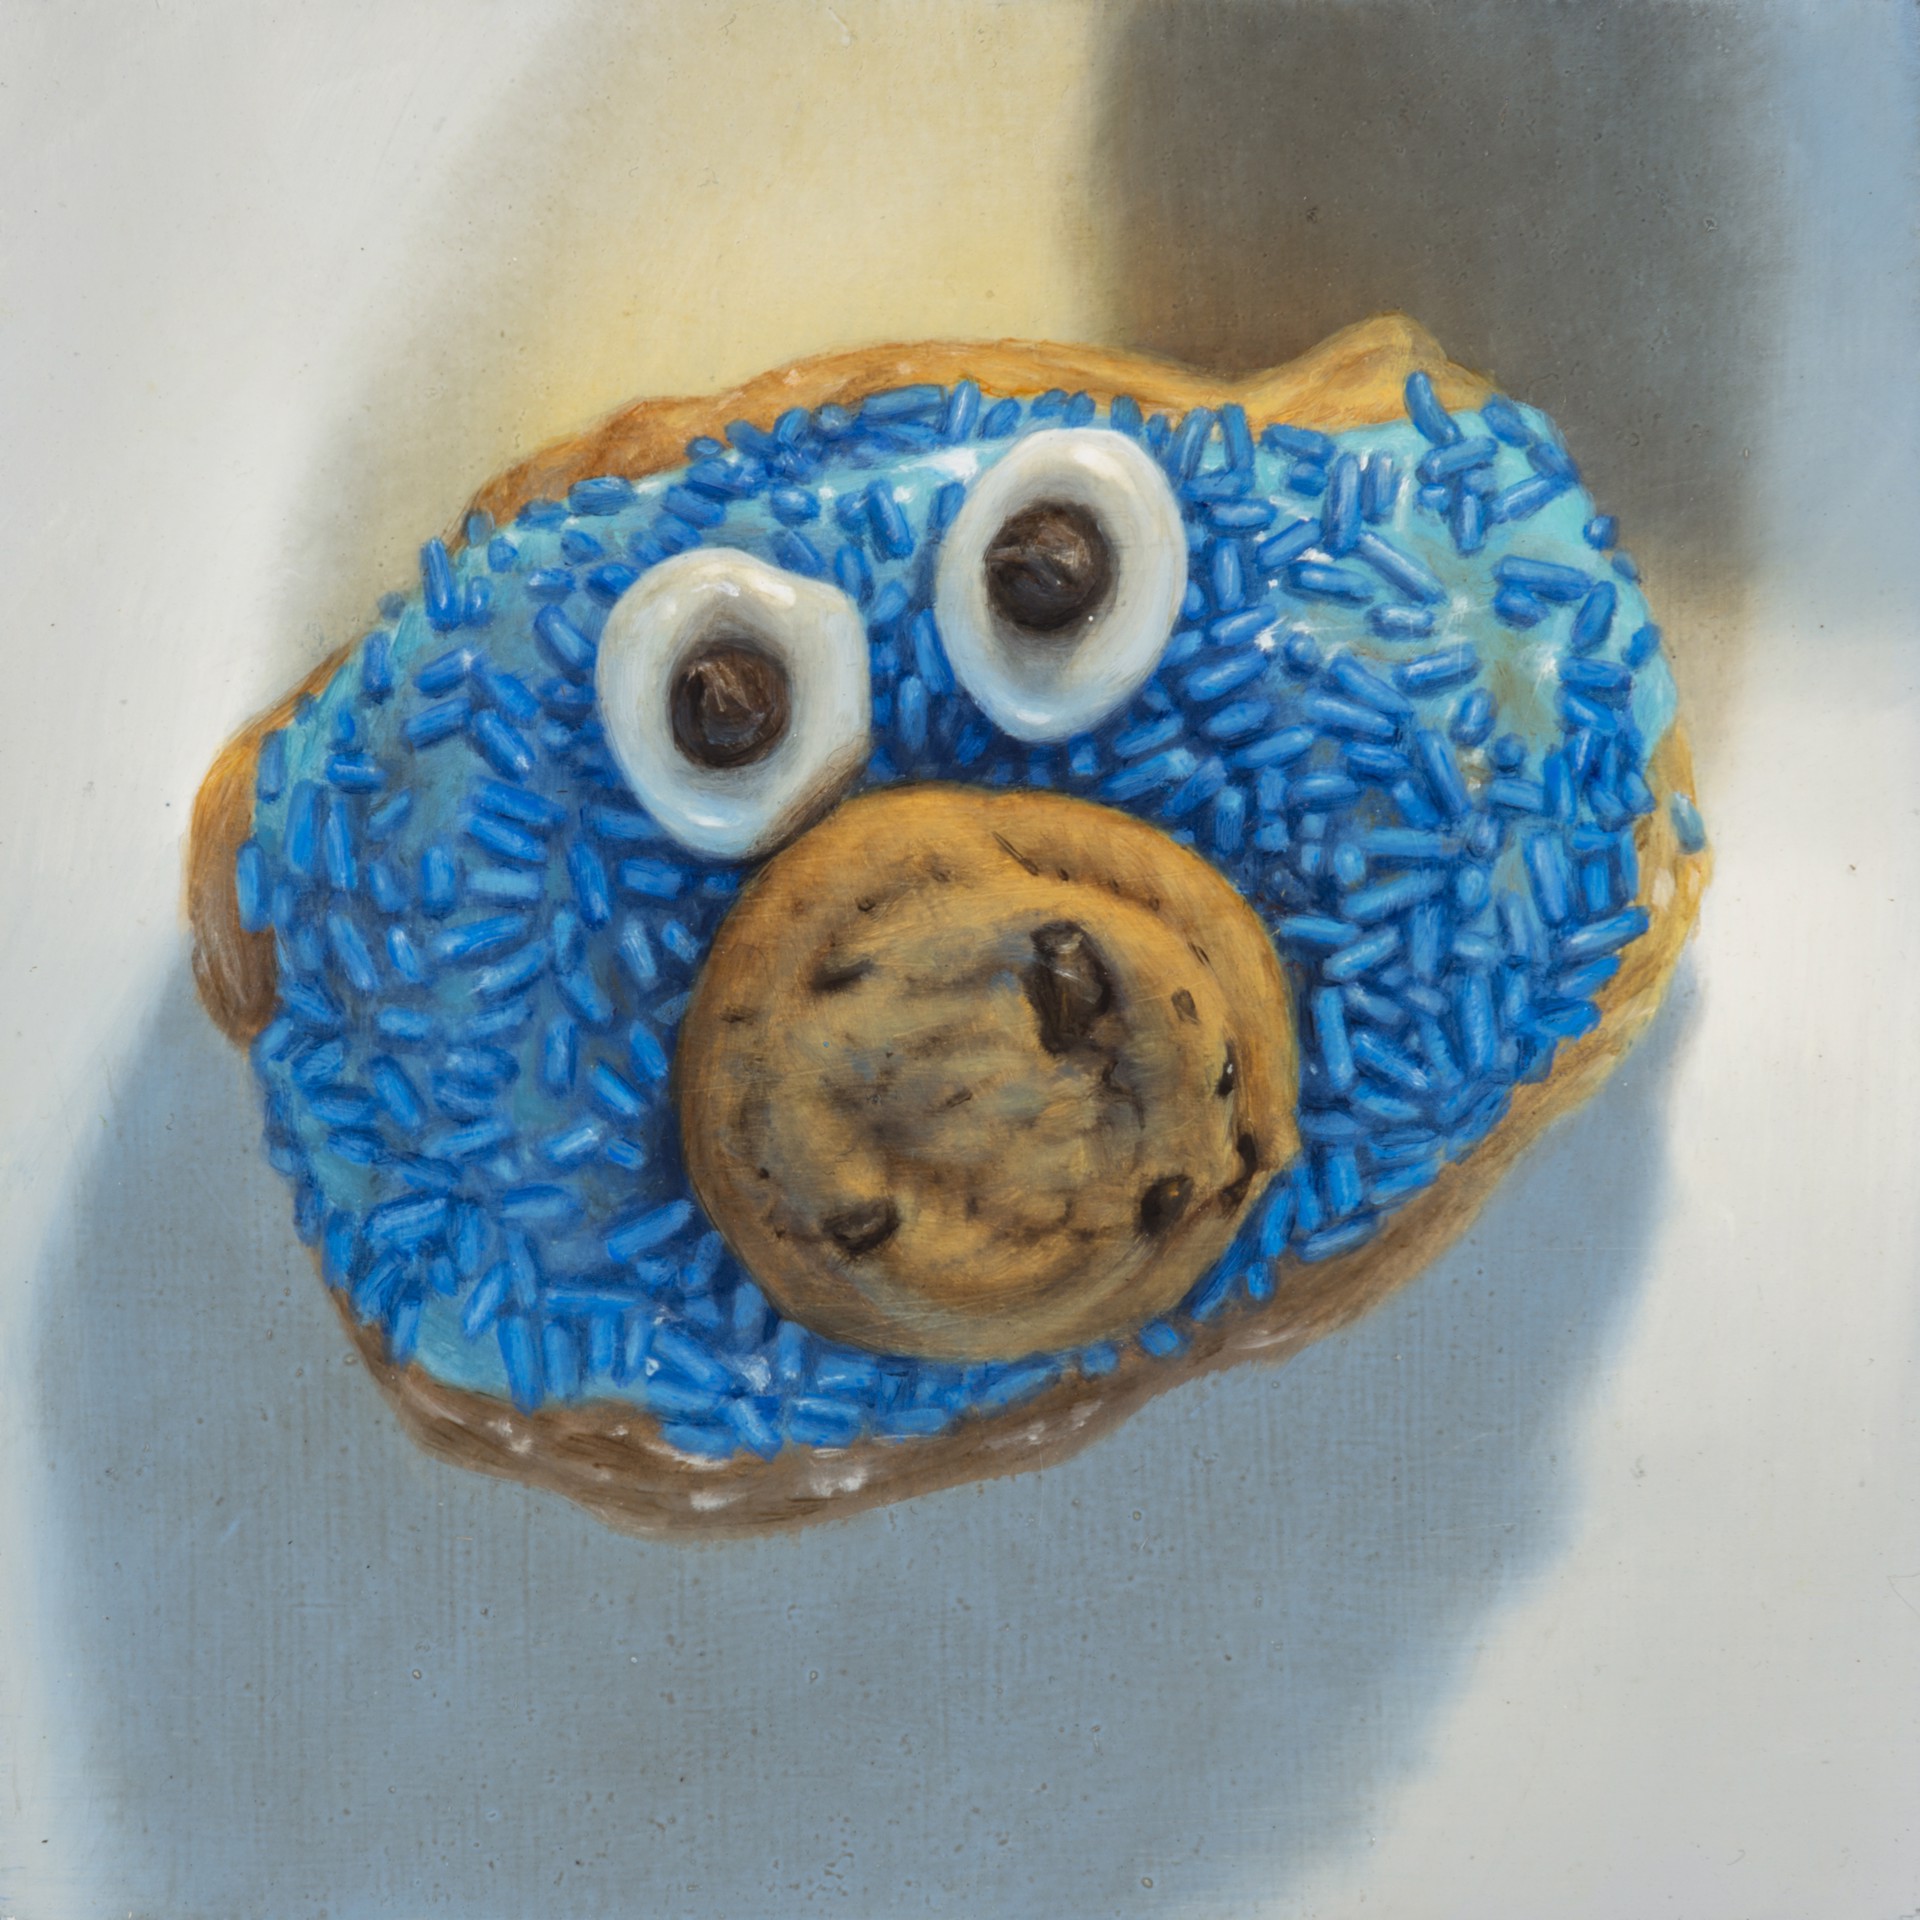 Cookie Monster by Gregory Block